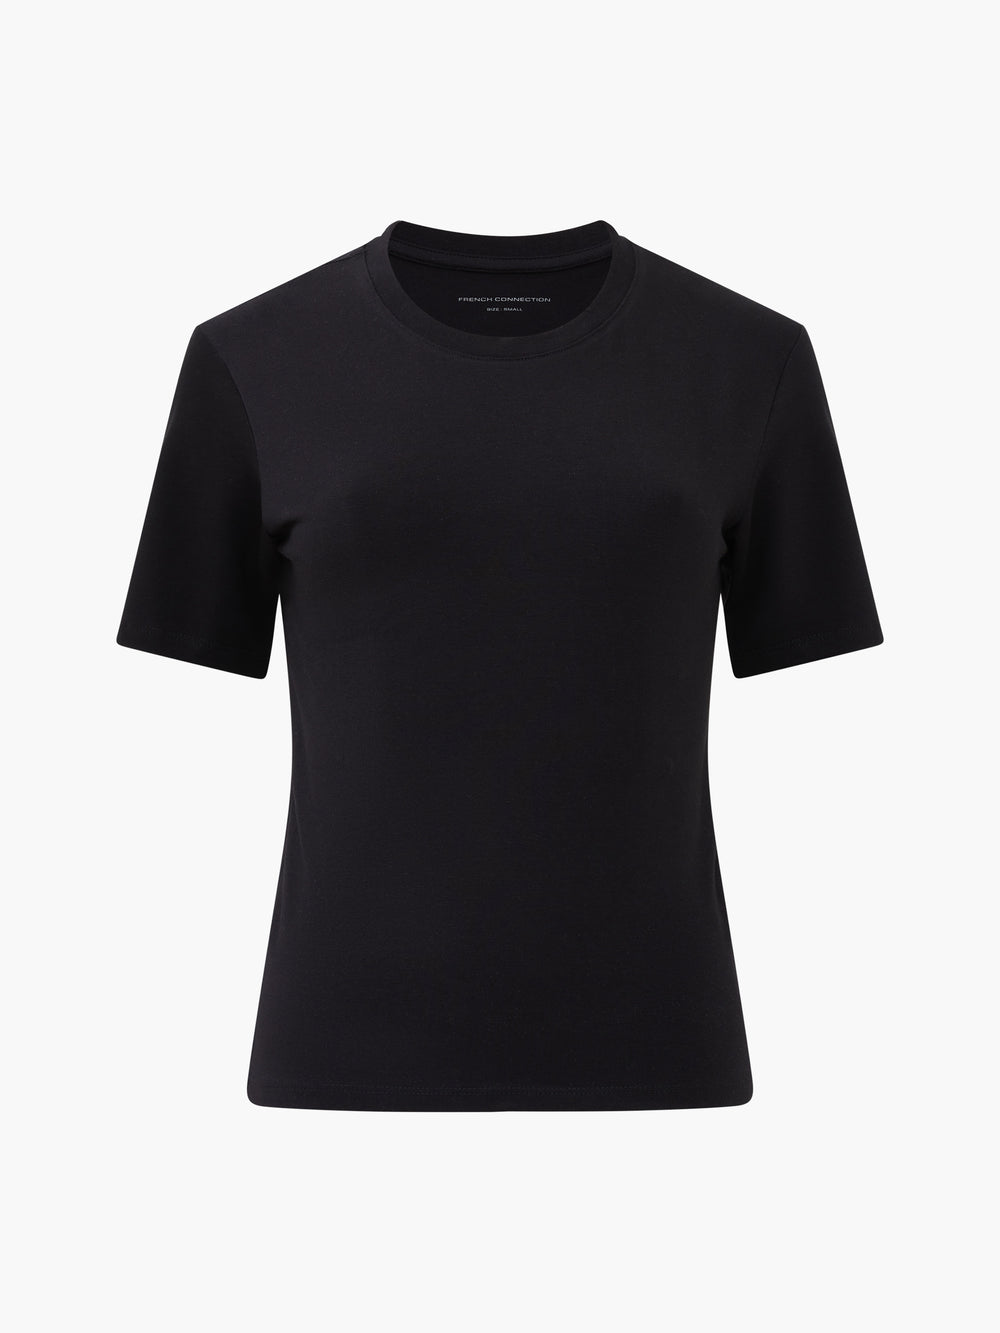 Rallie Cotton Crew Neck T-Shirt Black | French Connection UK